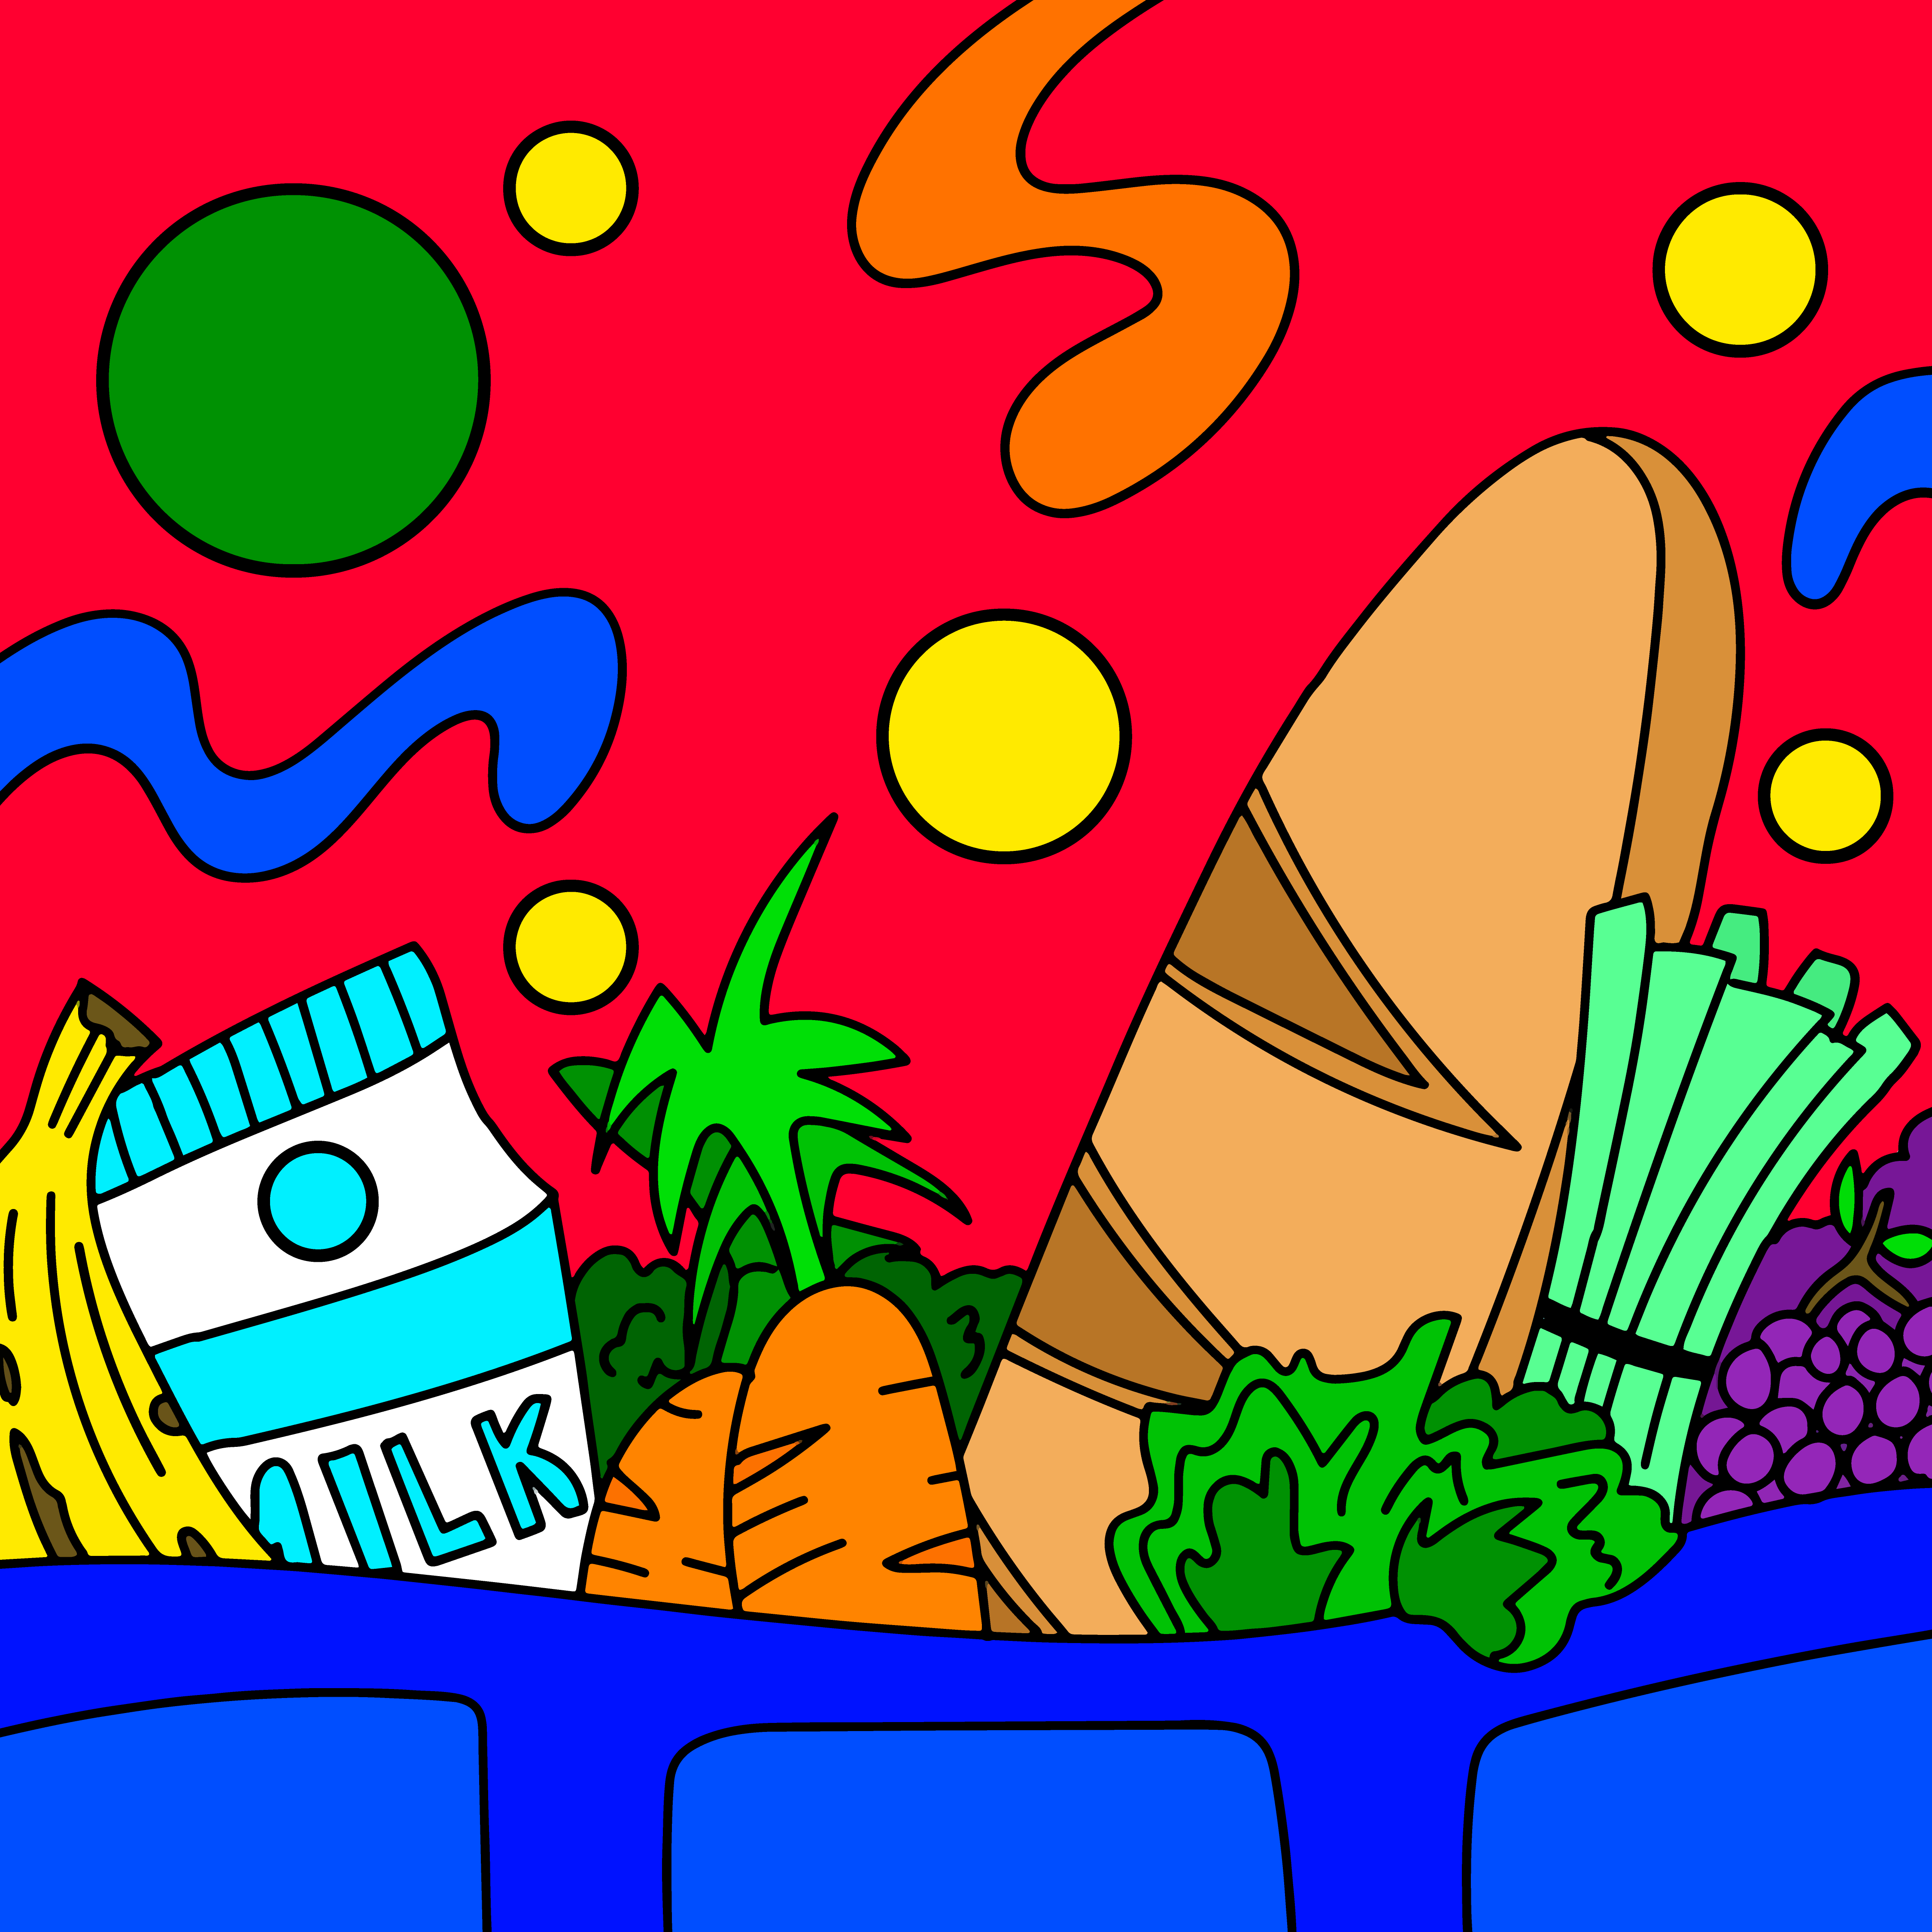 Nutrition article illustration by Mina Tocalini for 360 MAGAZINE